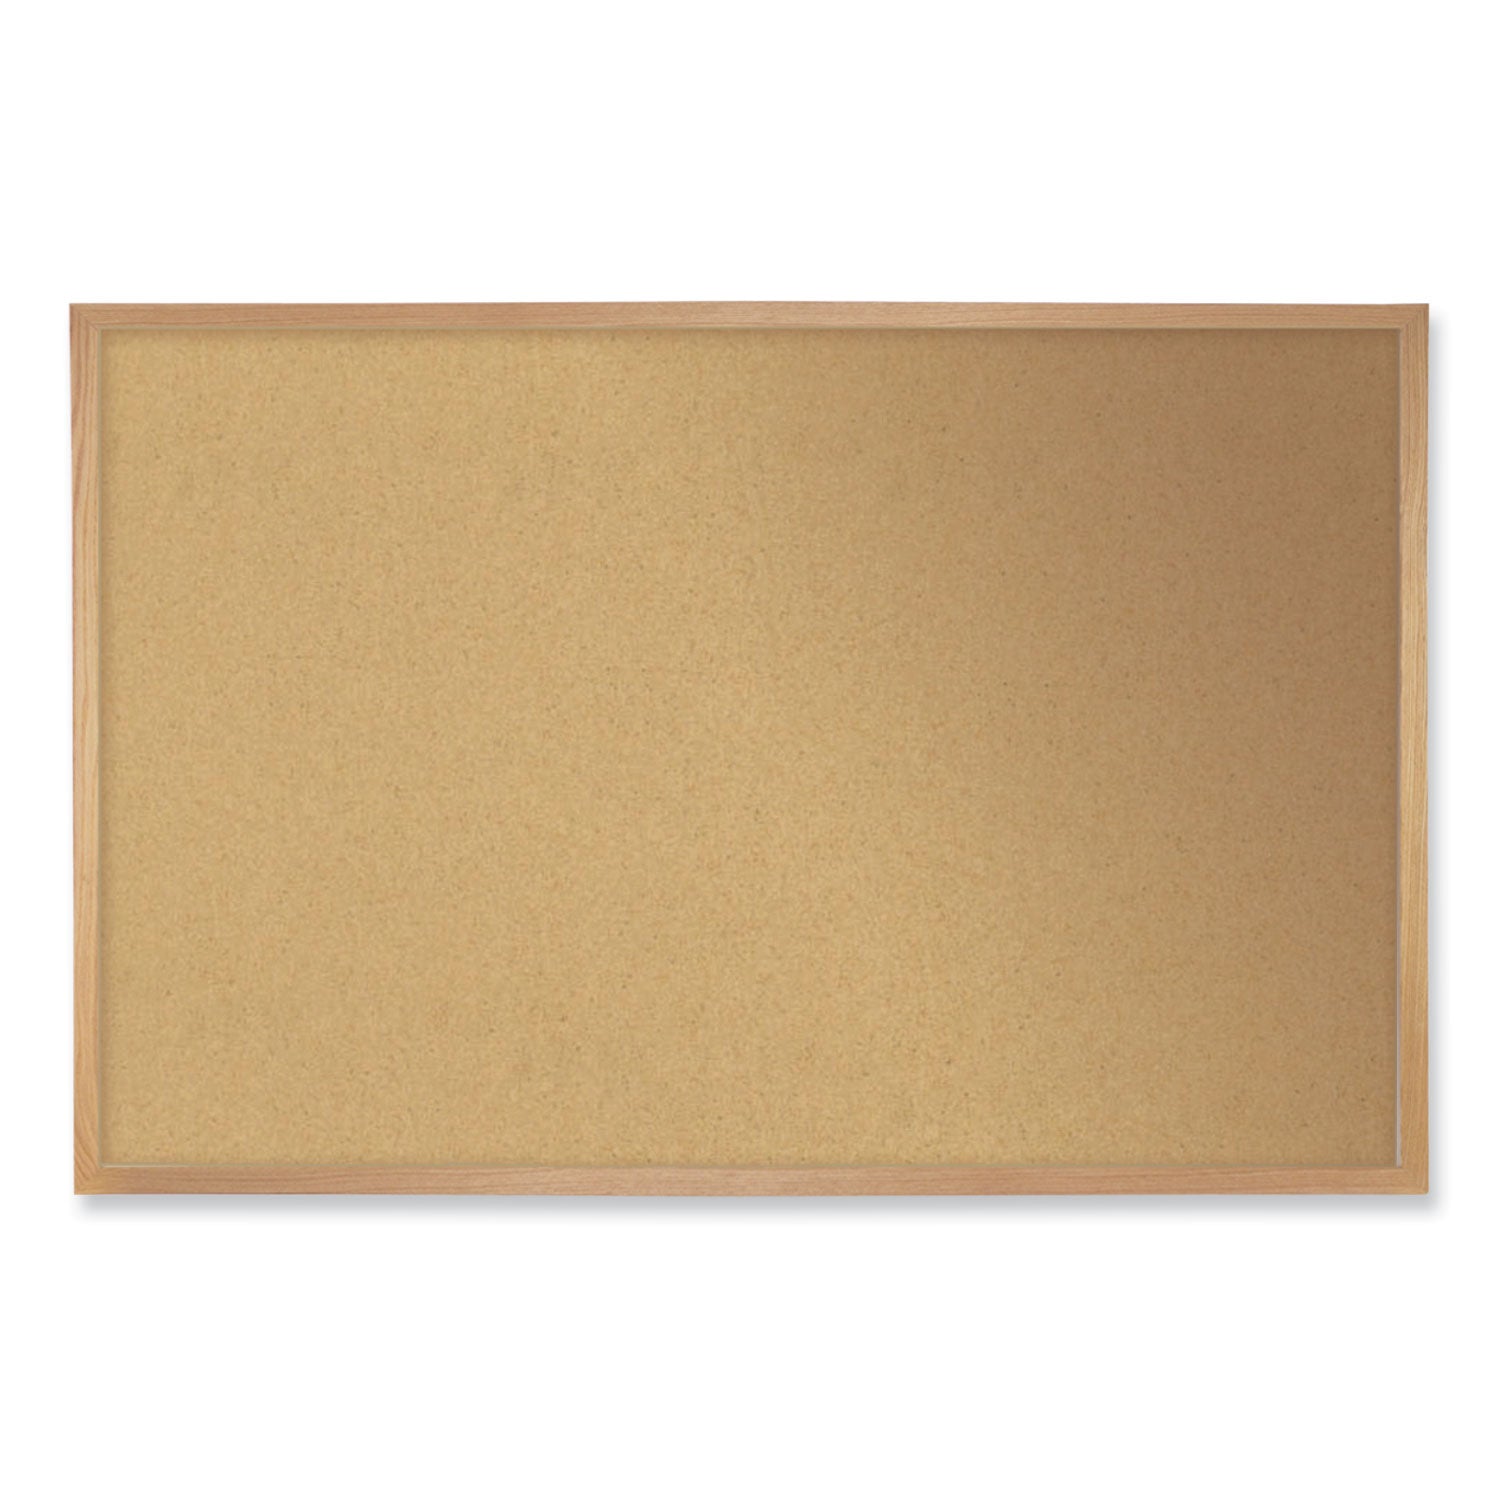 natural-cork-bulletin-board-with-frame-24-x-18-tan-surface-natural-oak-frame-ships-in-7-10-business-days_ghe14181 - 1